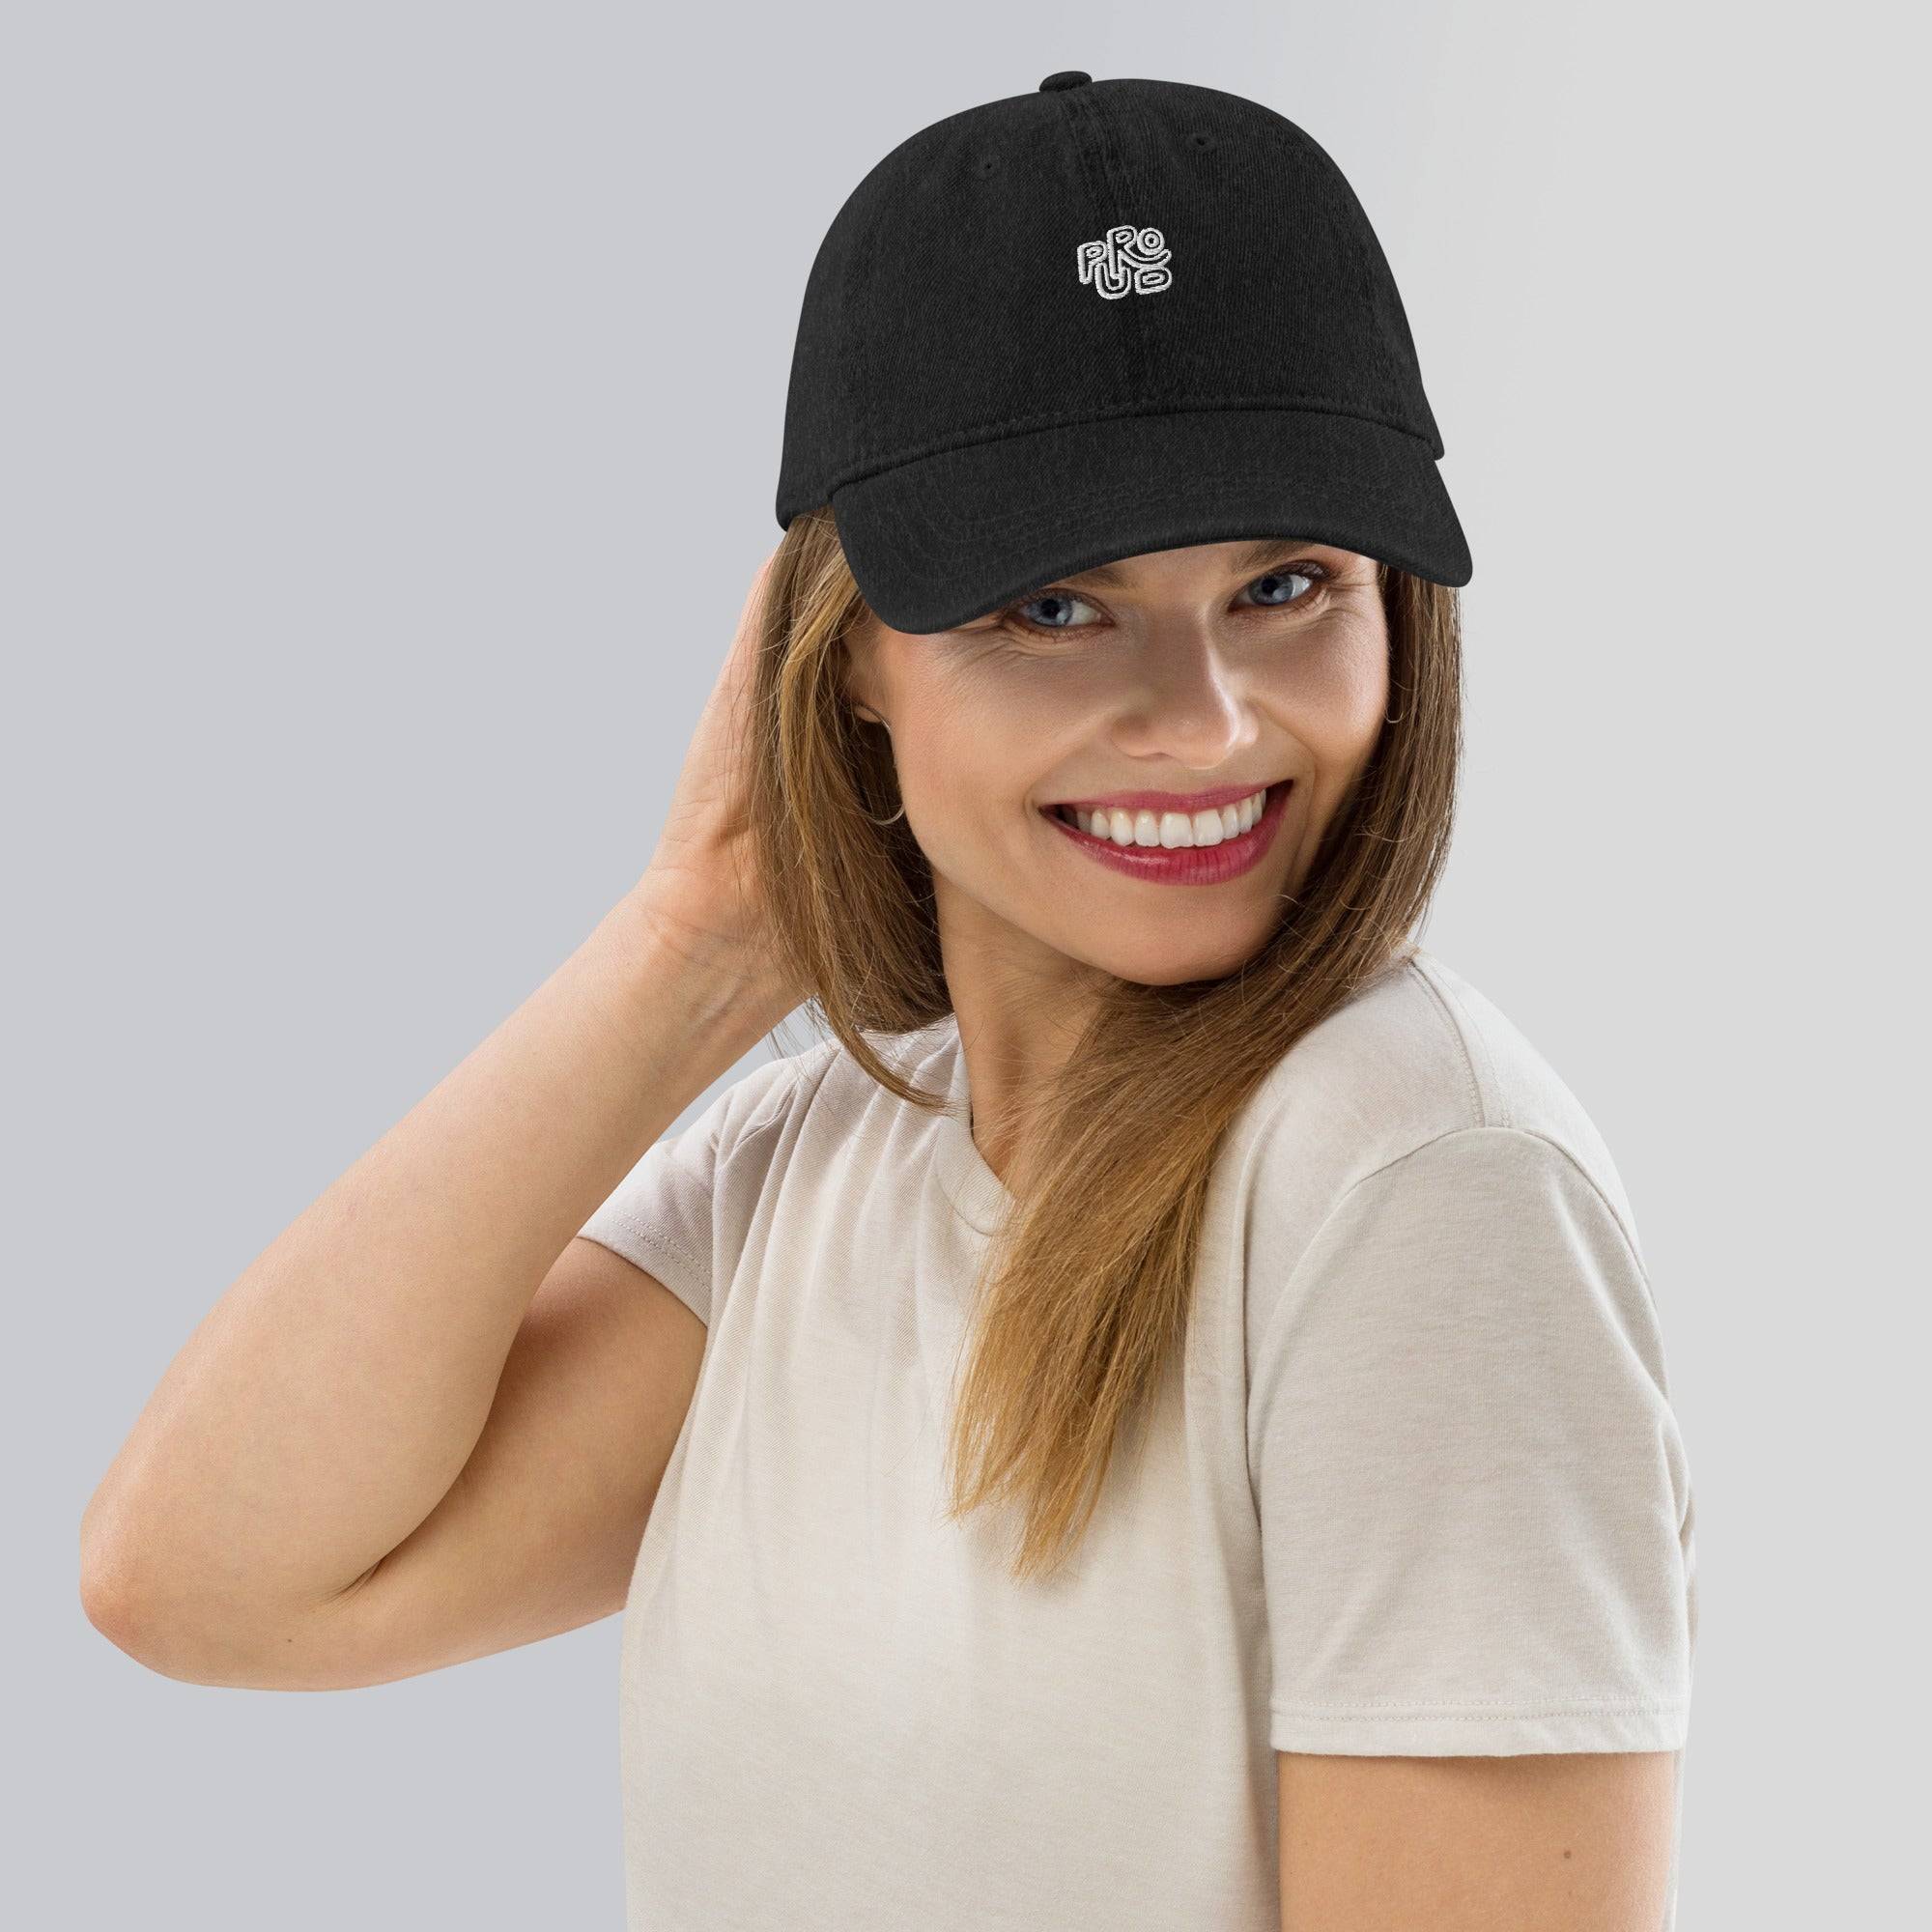 Ladies denim cap in black with embroidered proud in white